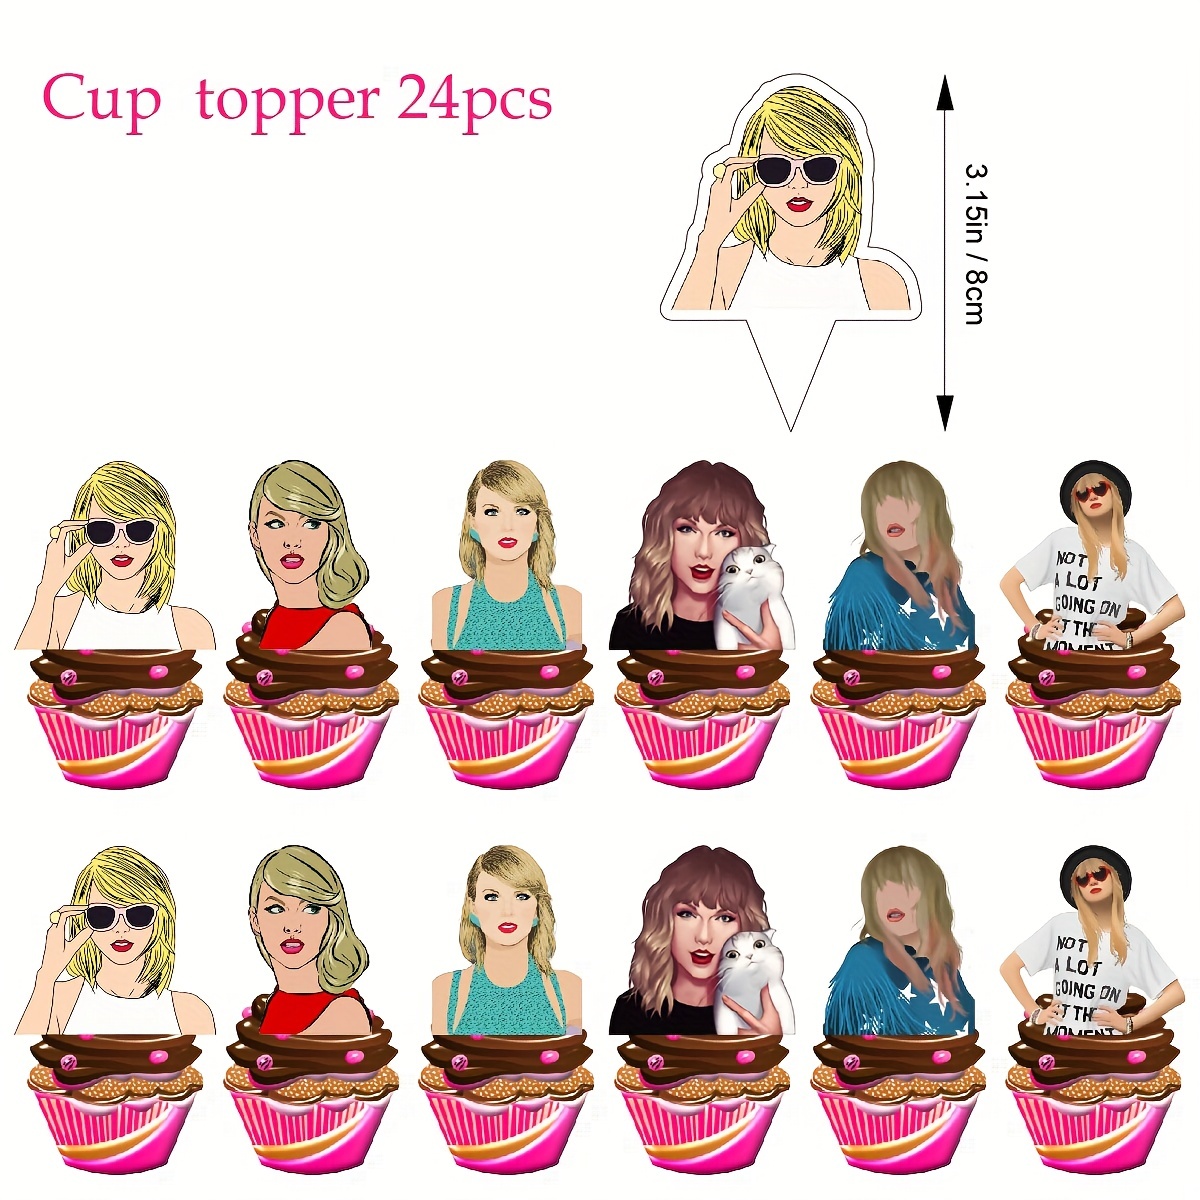 Taylor Swift Birthday Decorations - Taylor Swift Party Decorations - Taylor  Swift Party Favors, Include Happy Birthday Banner, Balloons, Cake Toppers  and Cupcake Toppers for Fans Party Decor 